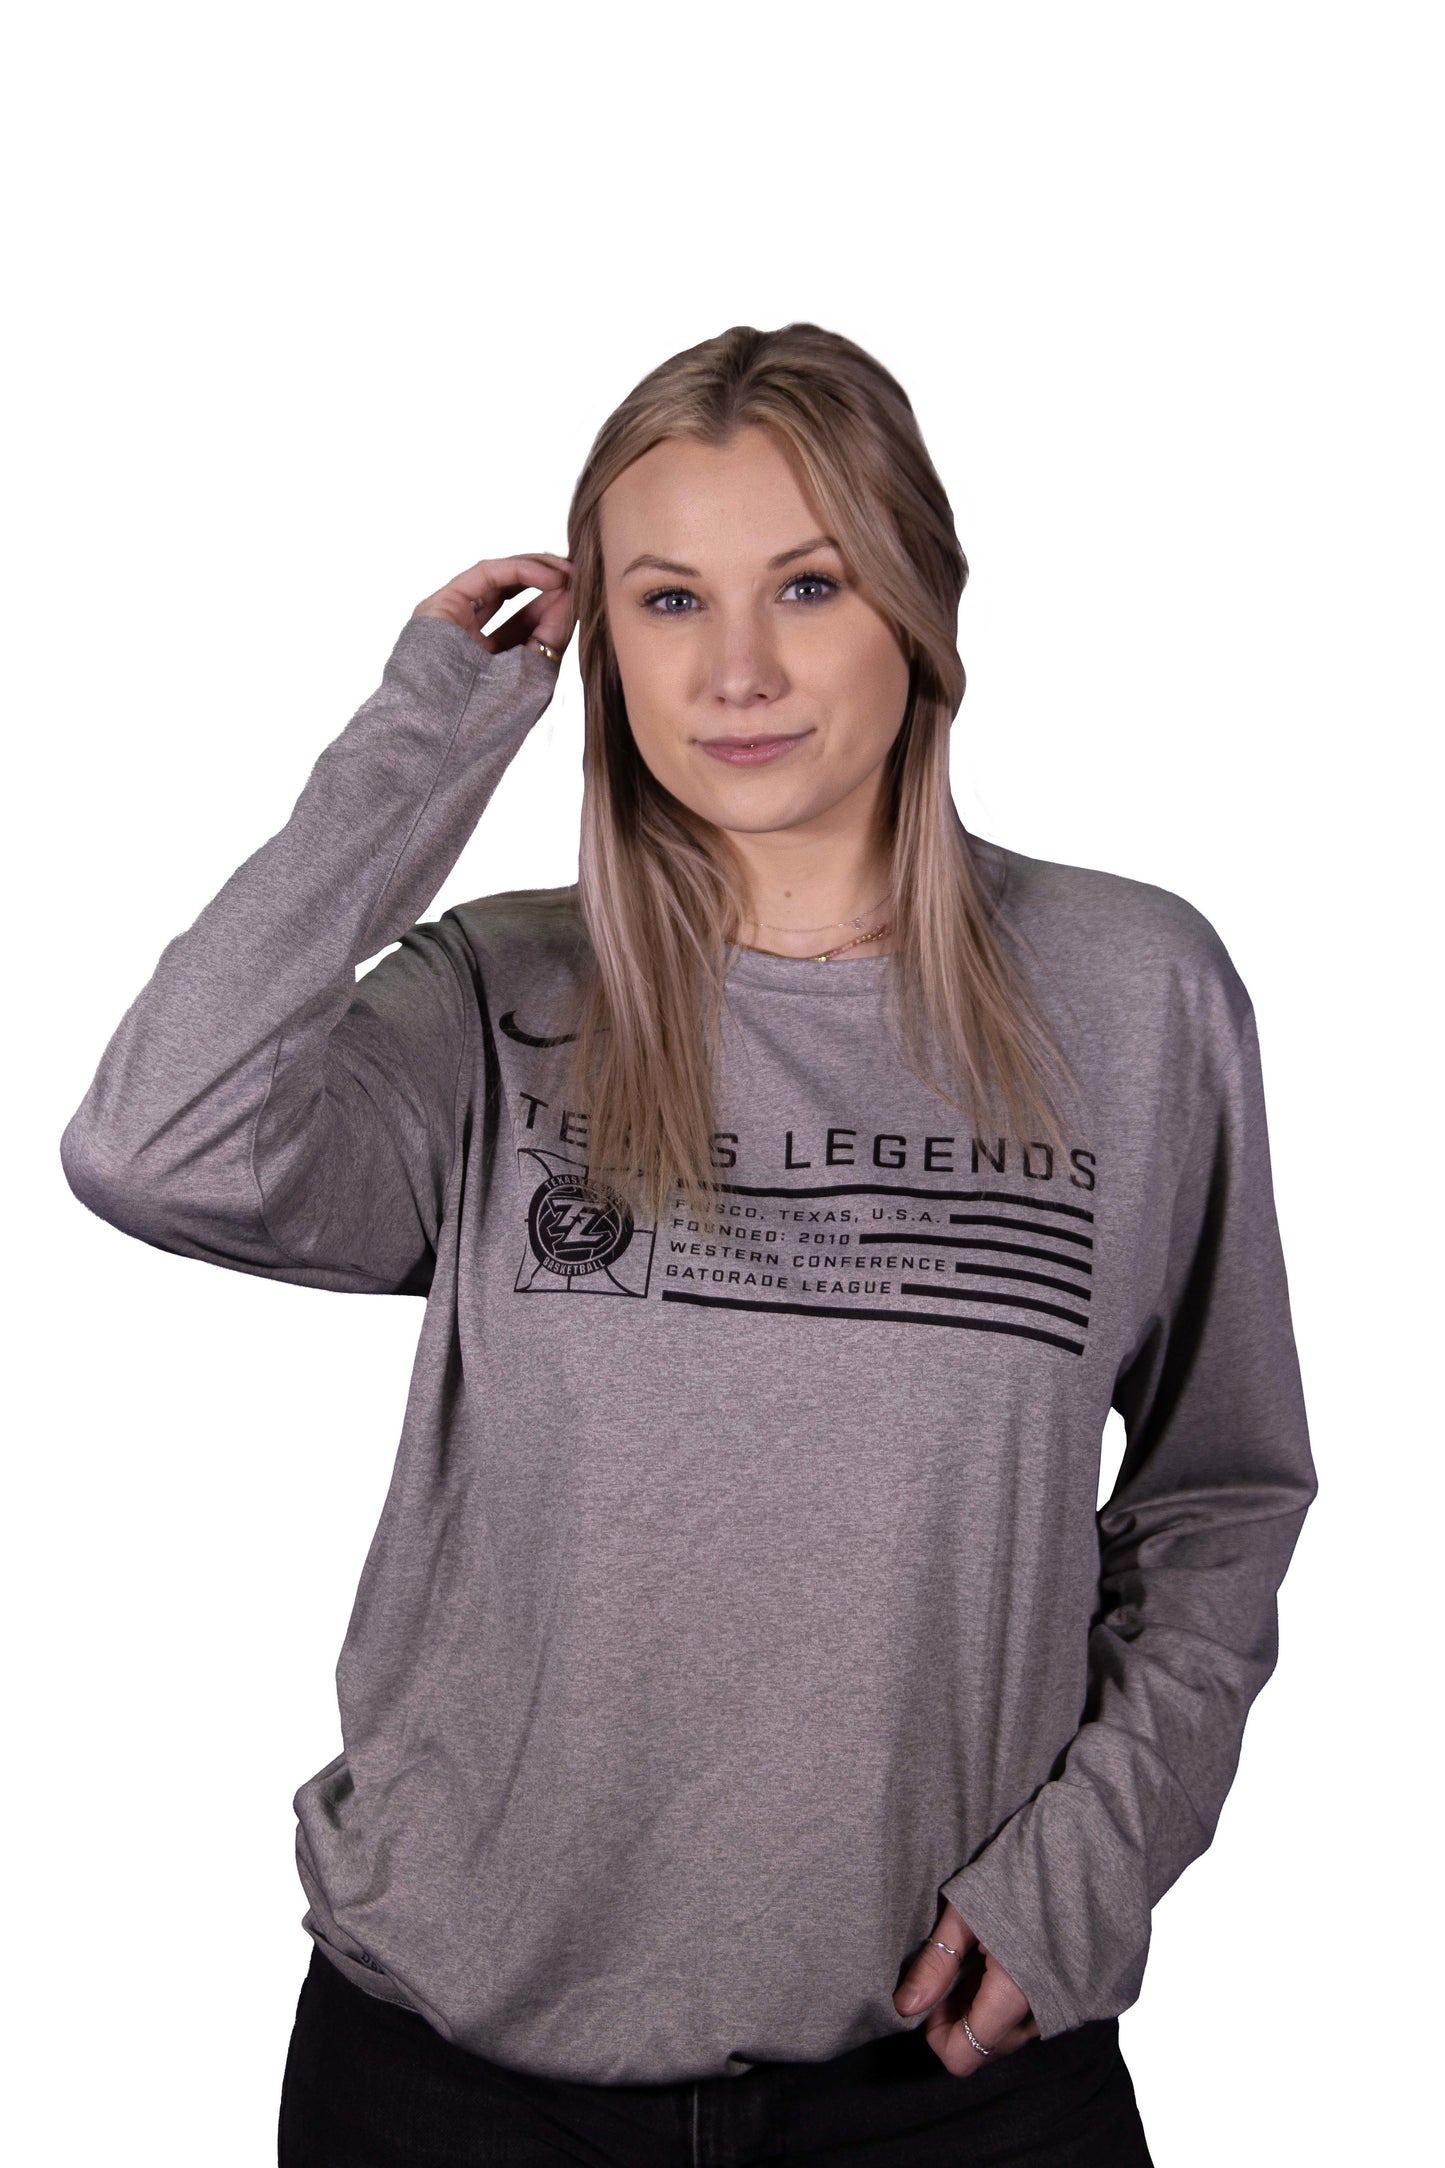 Nike Legends Founded Flag Dri Fit LS Tee